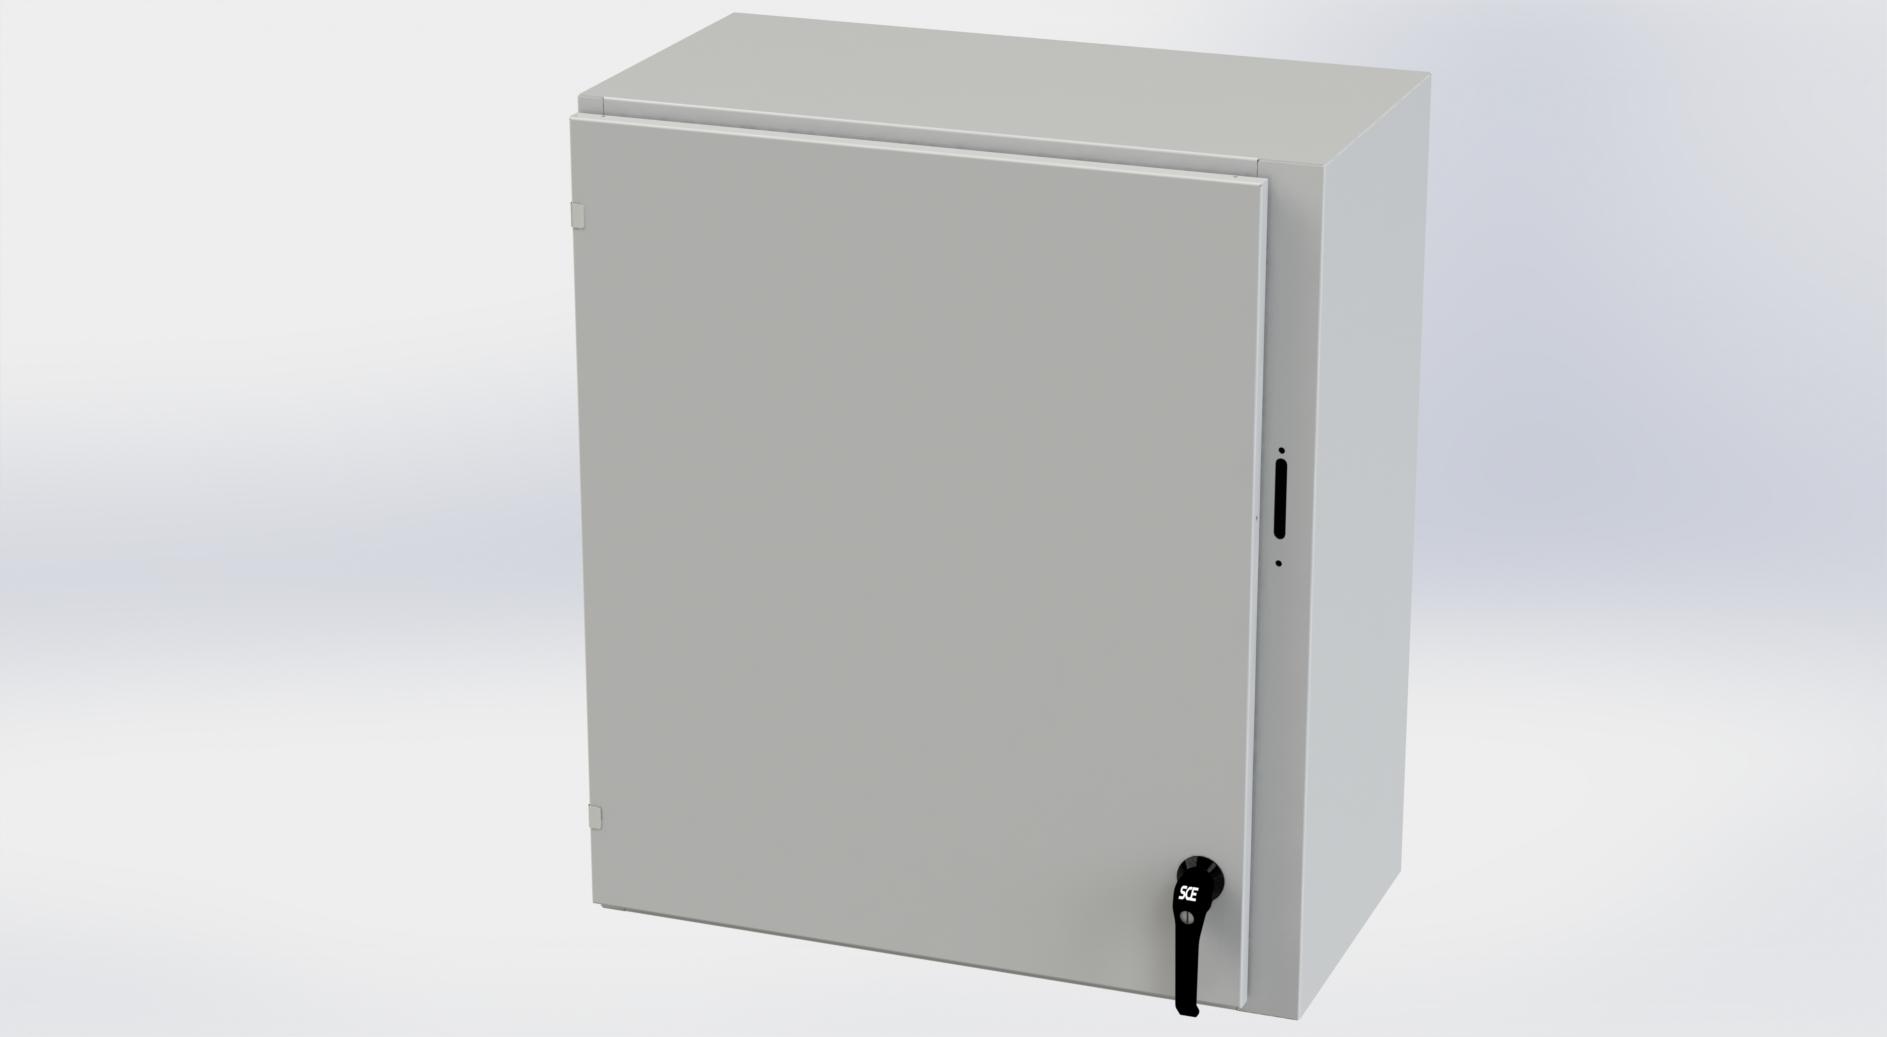 Saginaw Control SCE-36XEL3116LPLG XEL LP Enclosure, Height:36.00", Width:31.38", Depth:16.00", RAL 7035 gray powder coating inside and out. Optional sub-panels are powder coated white.